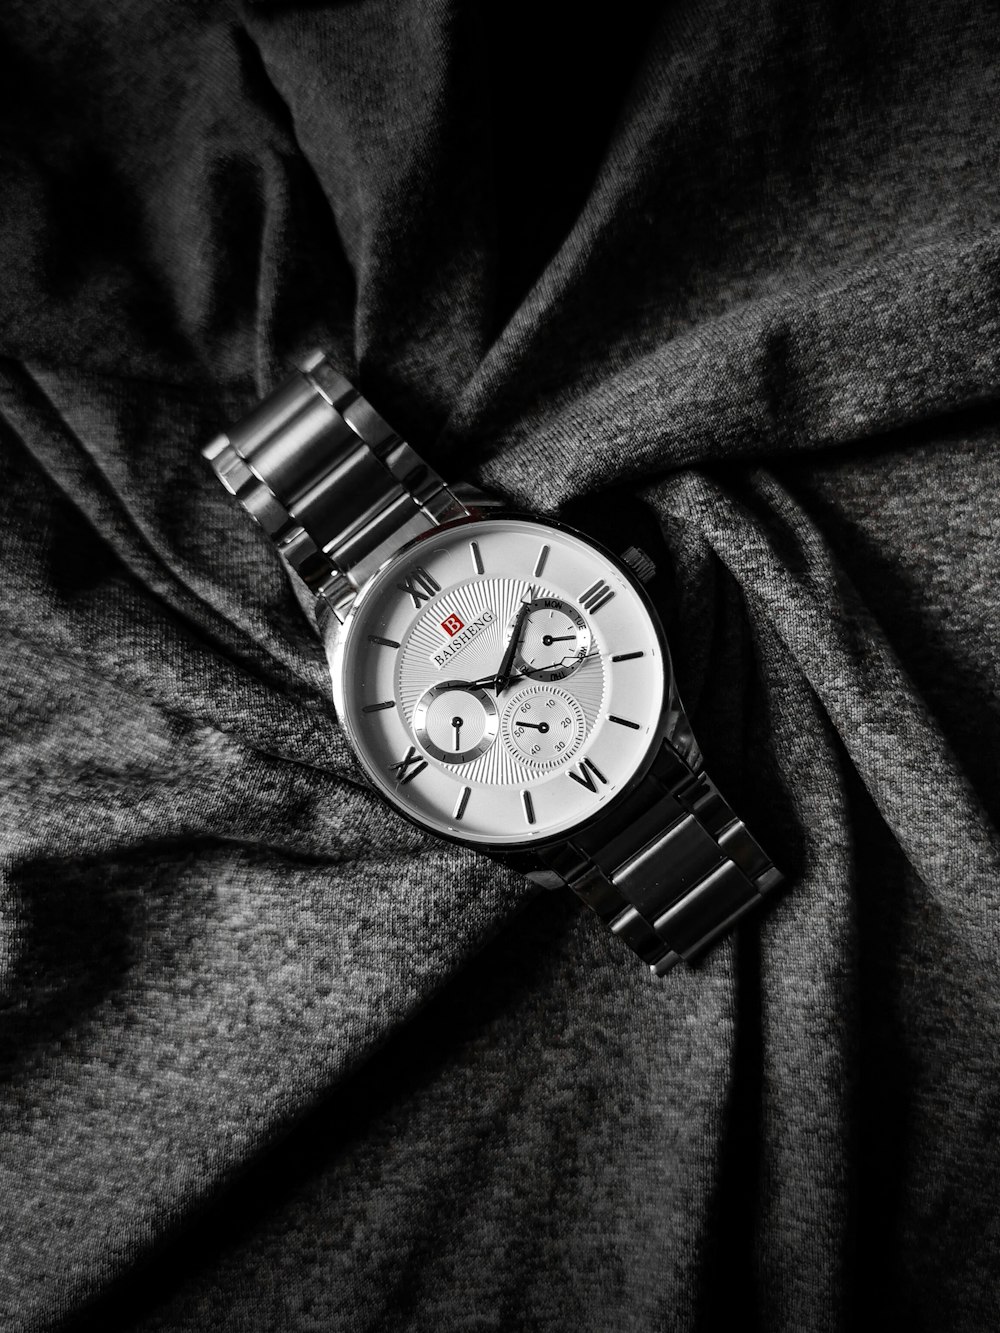 a watch is laying on a black cloth